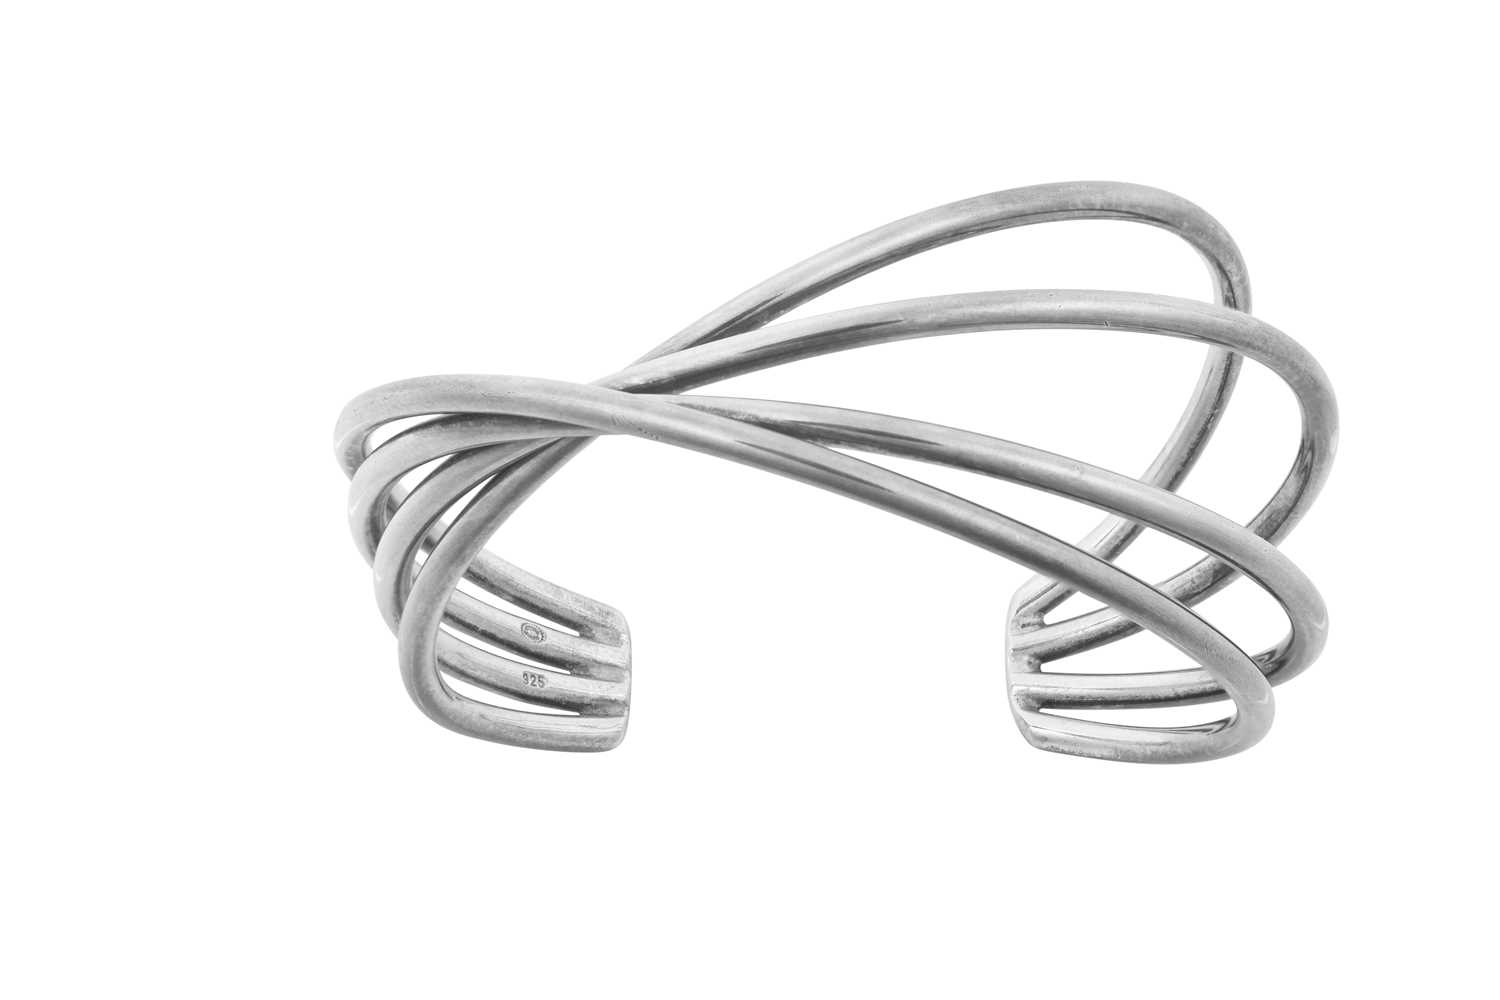 An 'Alliance' Bangle, by Georg Jensen formed of four white plain polished crossover bands measures